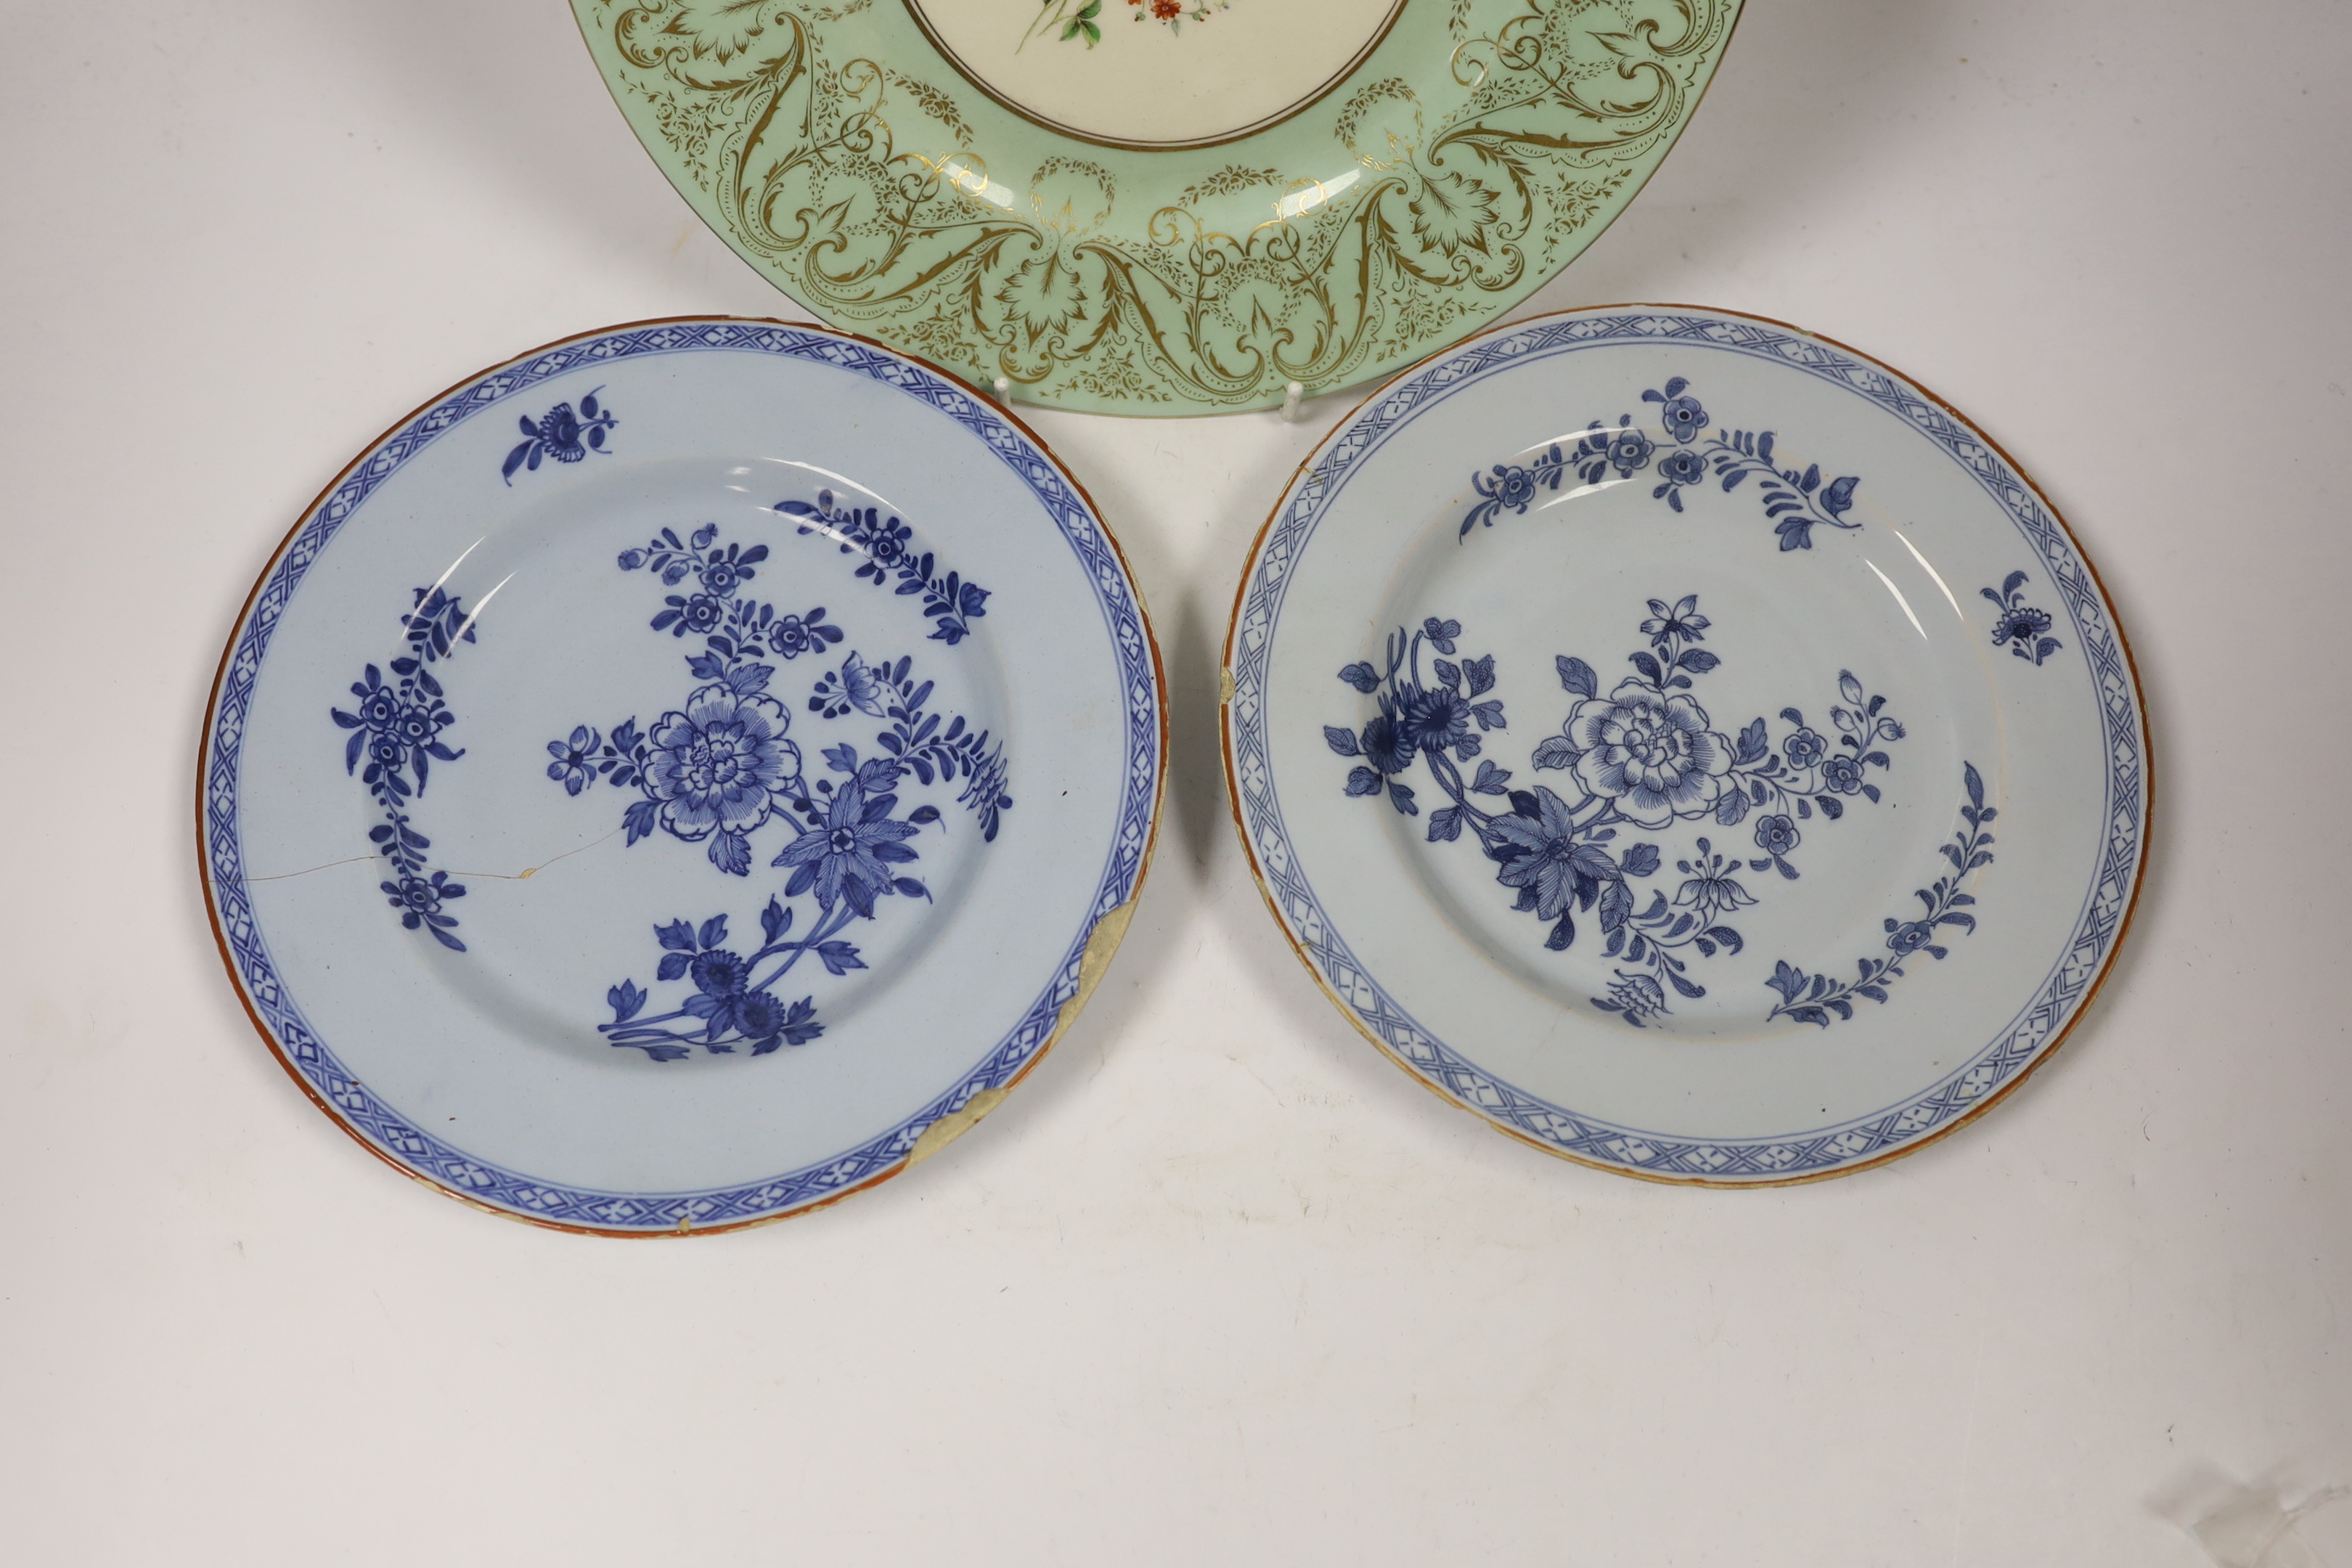 A pair of Delft plates, one dated 1771 and another Royal Worcester floral decorated plate, 27cm diameter